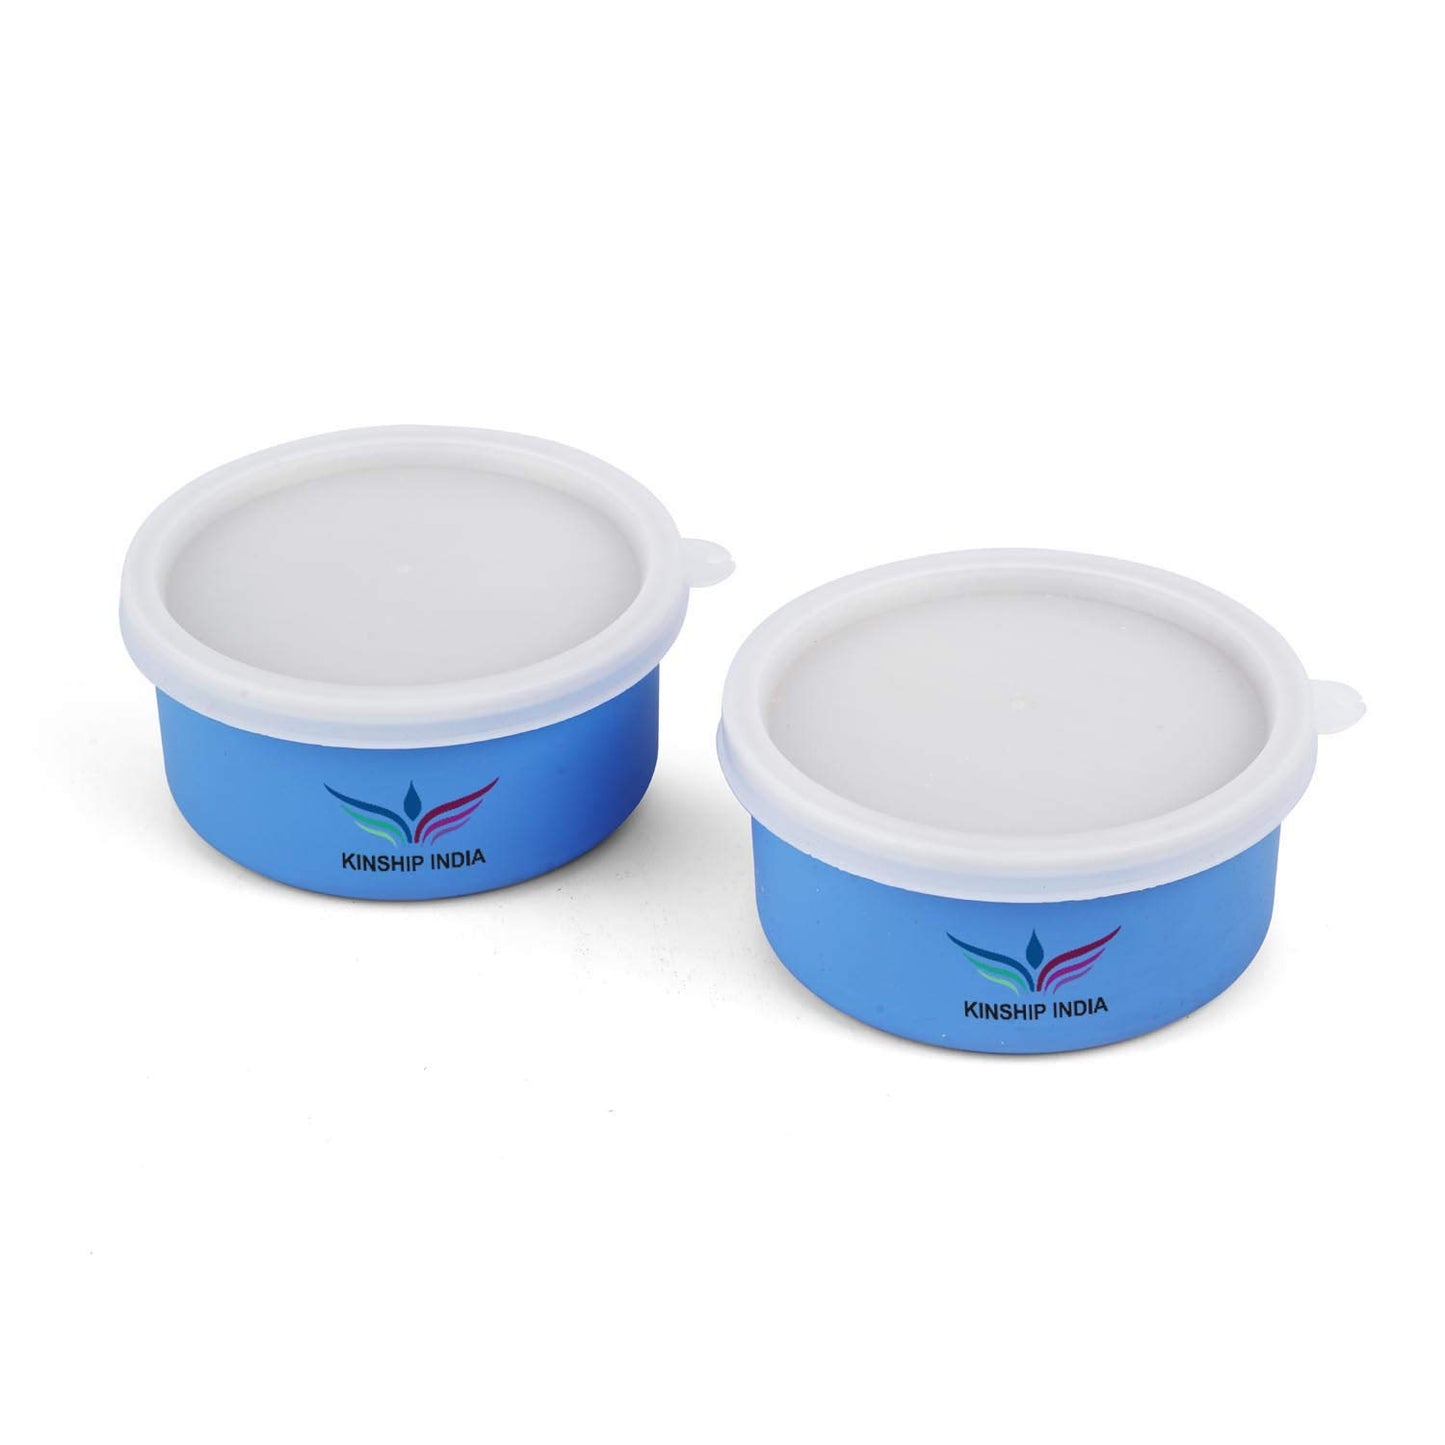 Microwave Safe Stainless Steel Small Lunch Containers (300 ML)-Set of 2 (Blue)